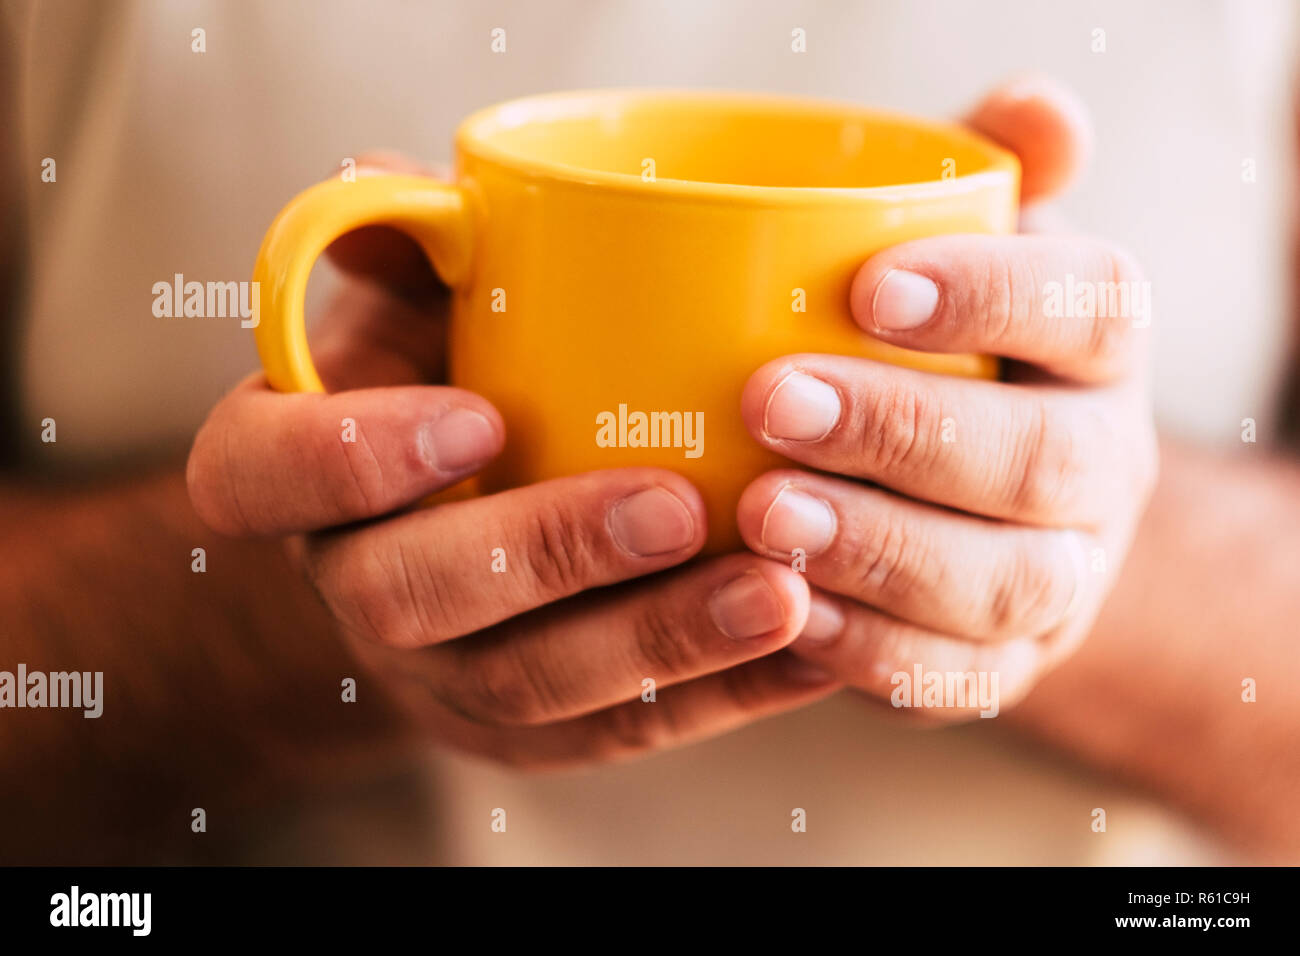 Download Close Up Of Woman S Hand Taking A Big Yellow Cup Of Hot Beverage Like Tea Or Coffee Sweet Home And Healthy Lifestyle Concept For Weight Loss Or Rela Stock Photo Alamy Yellowimages Mockups